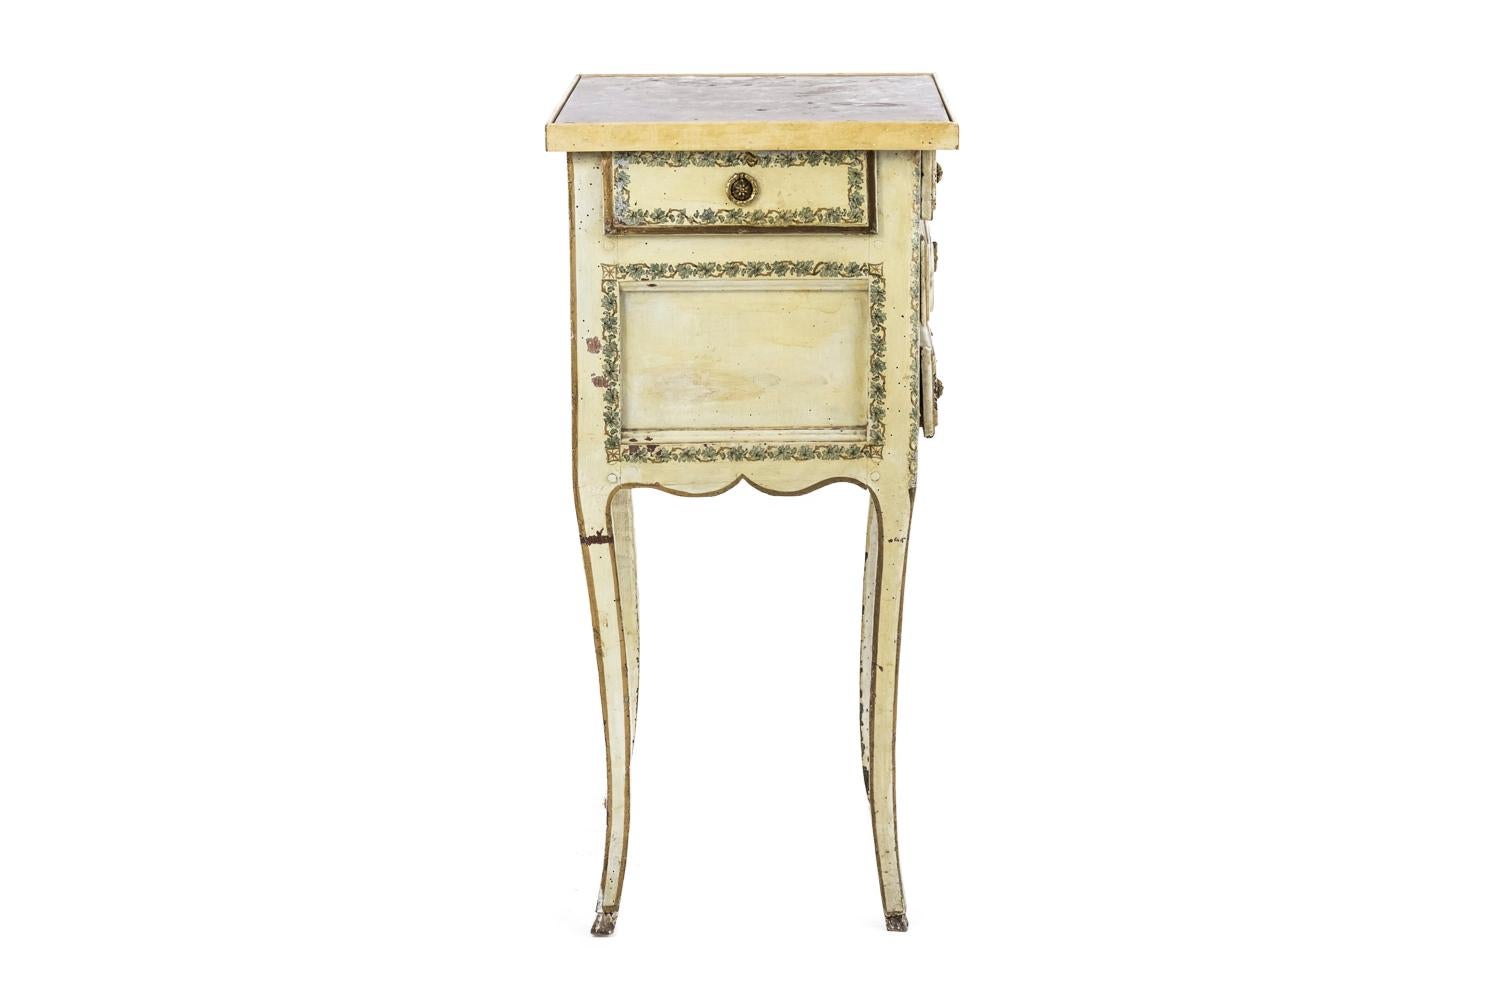 French Yellow Lacquered Bedside Table with Drawers and Gilt Bronze, Louis XV Period